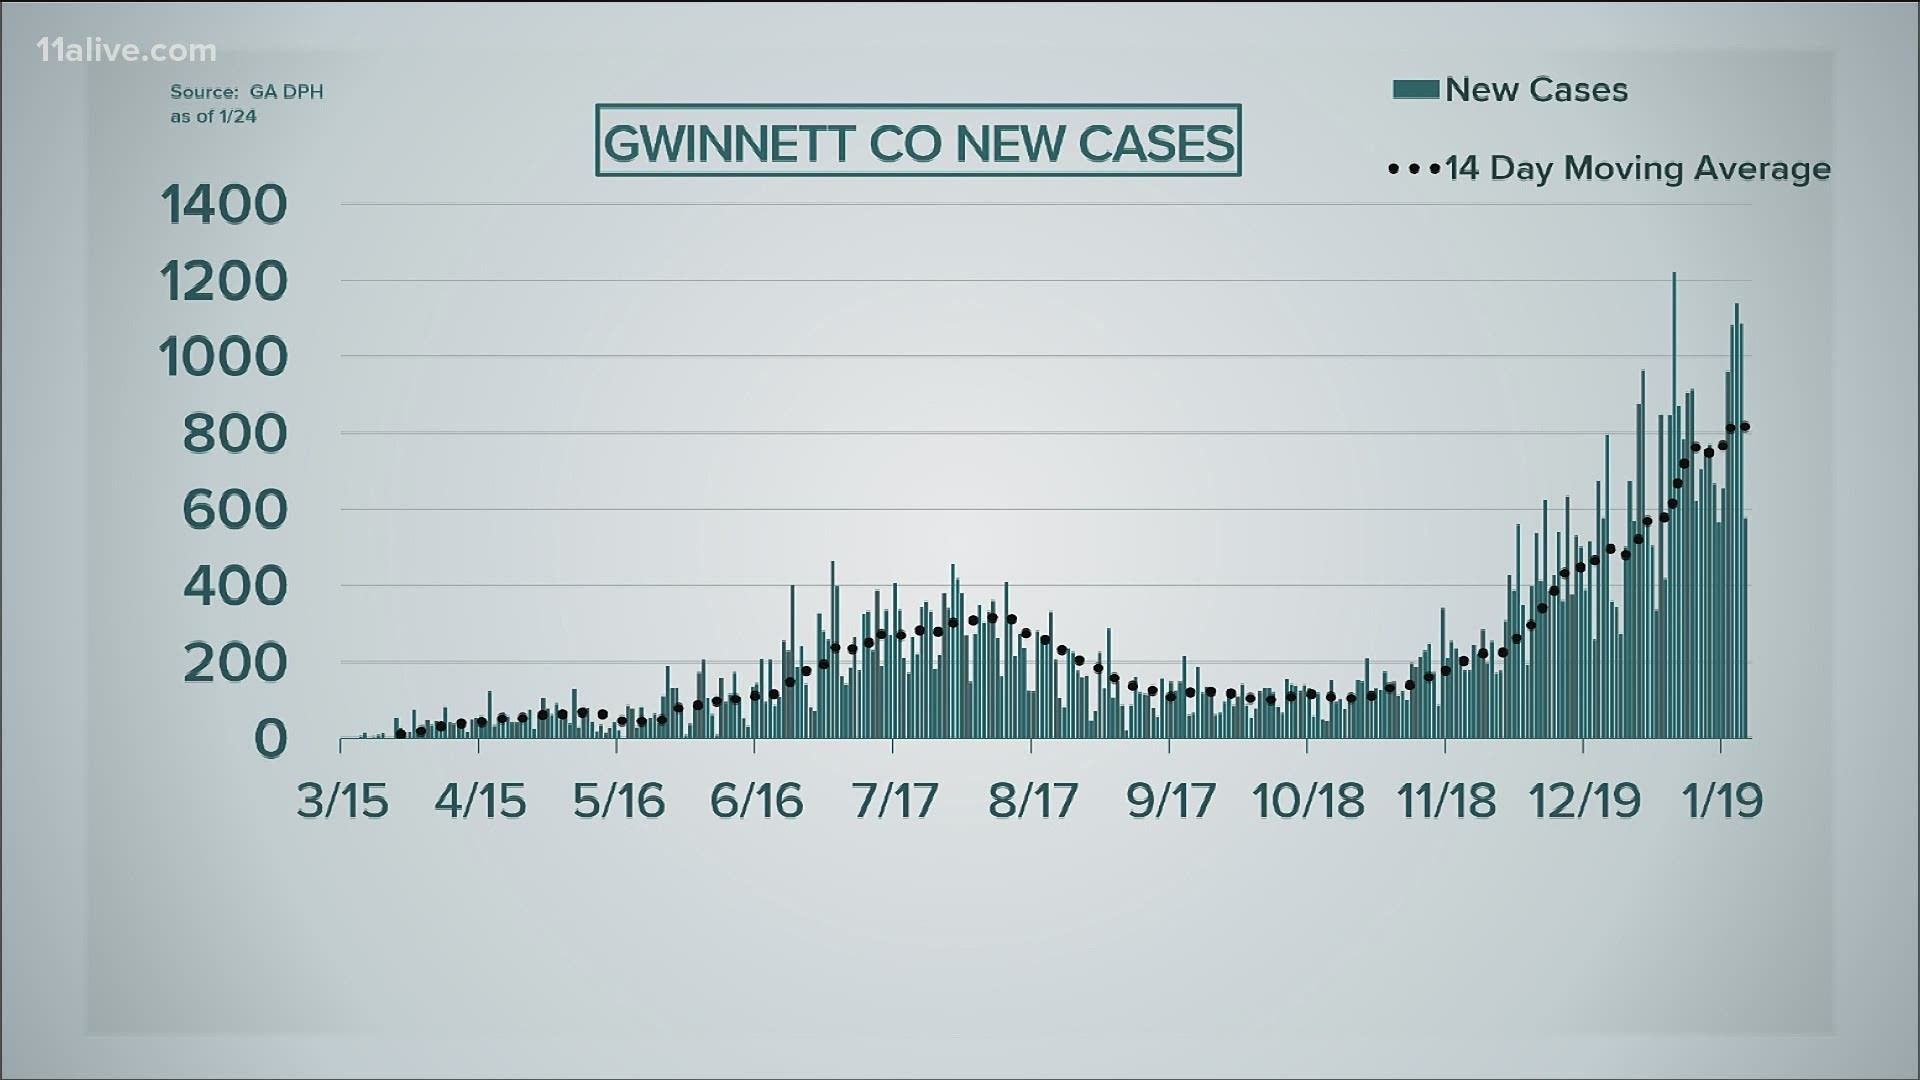 Three days last week, Gwinnett recorded more than 1,000 new COVID cases each day.